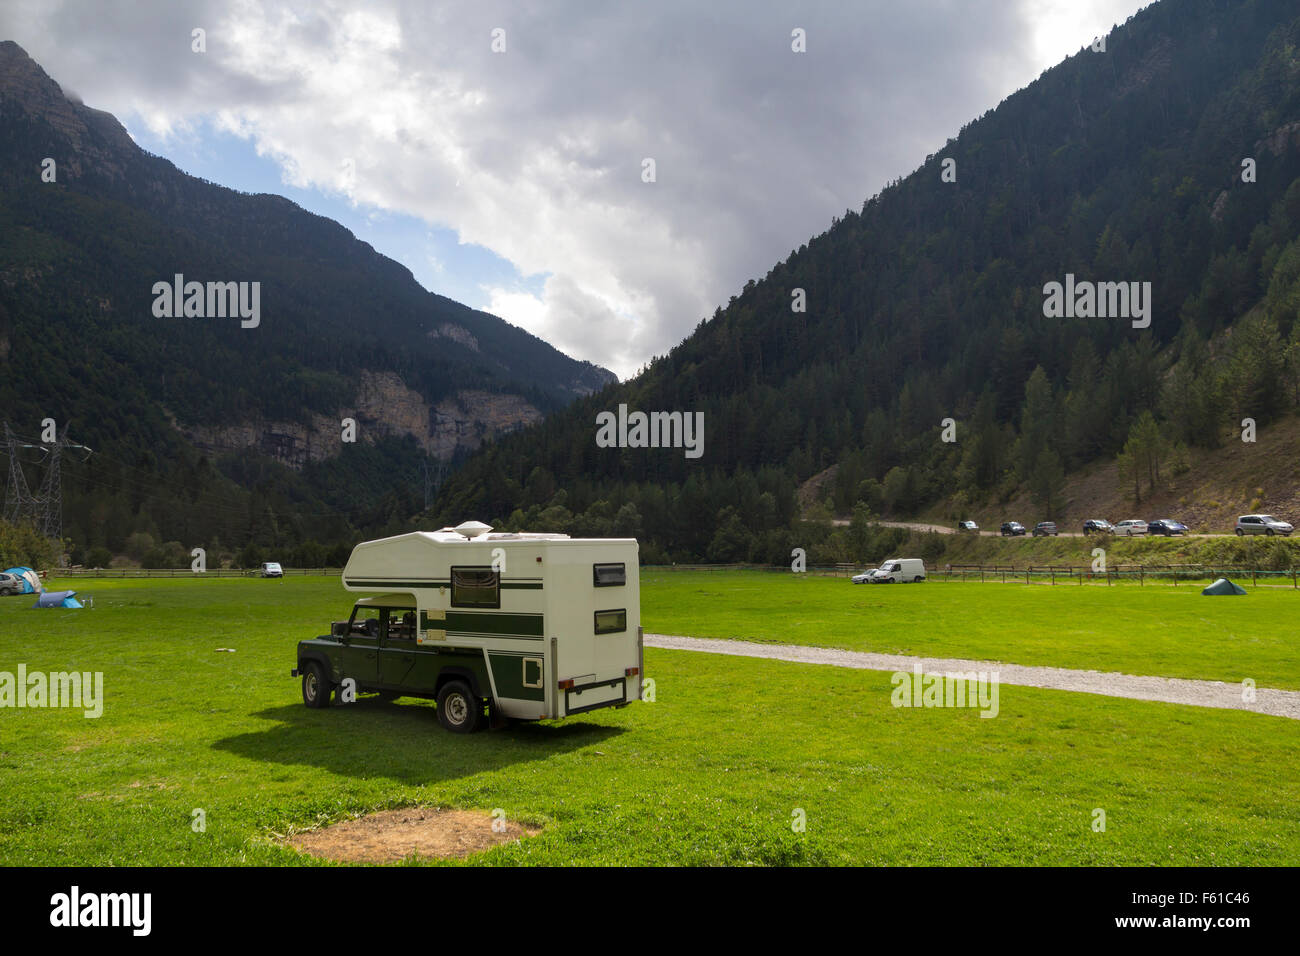 4x4 mobile home outdoors, in a green valley Stock Photo